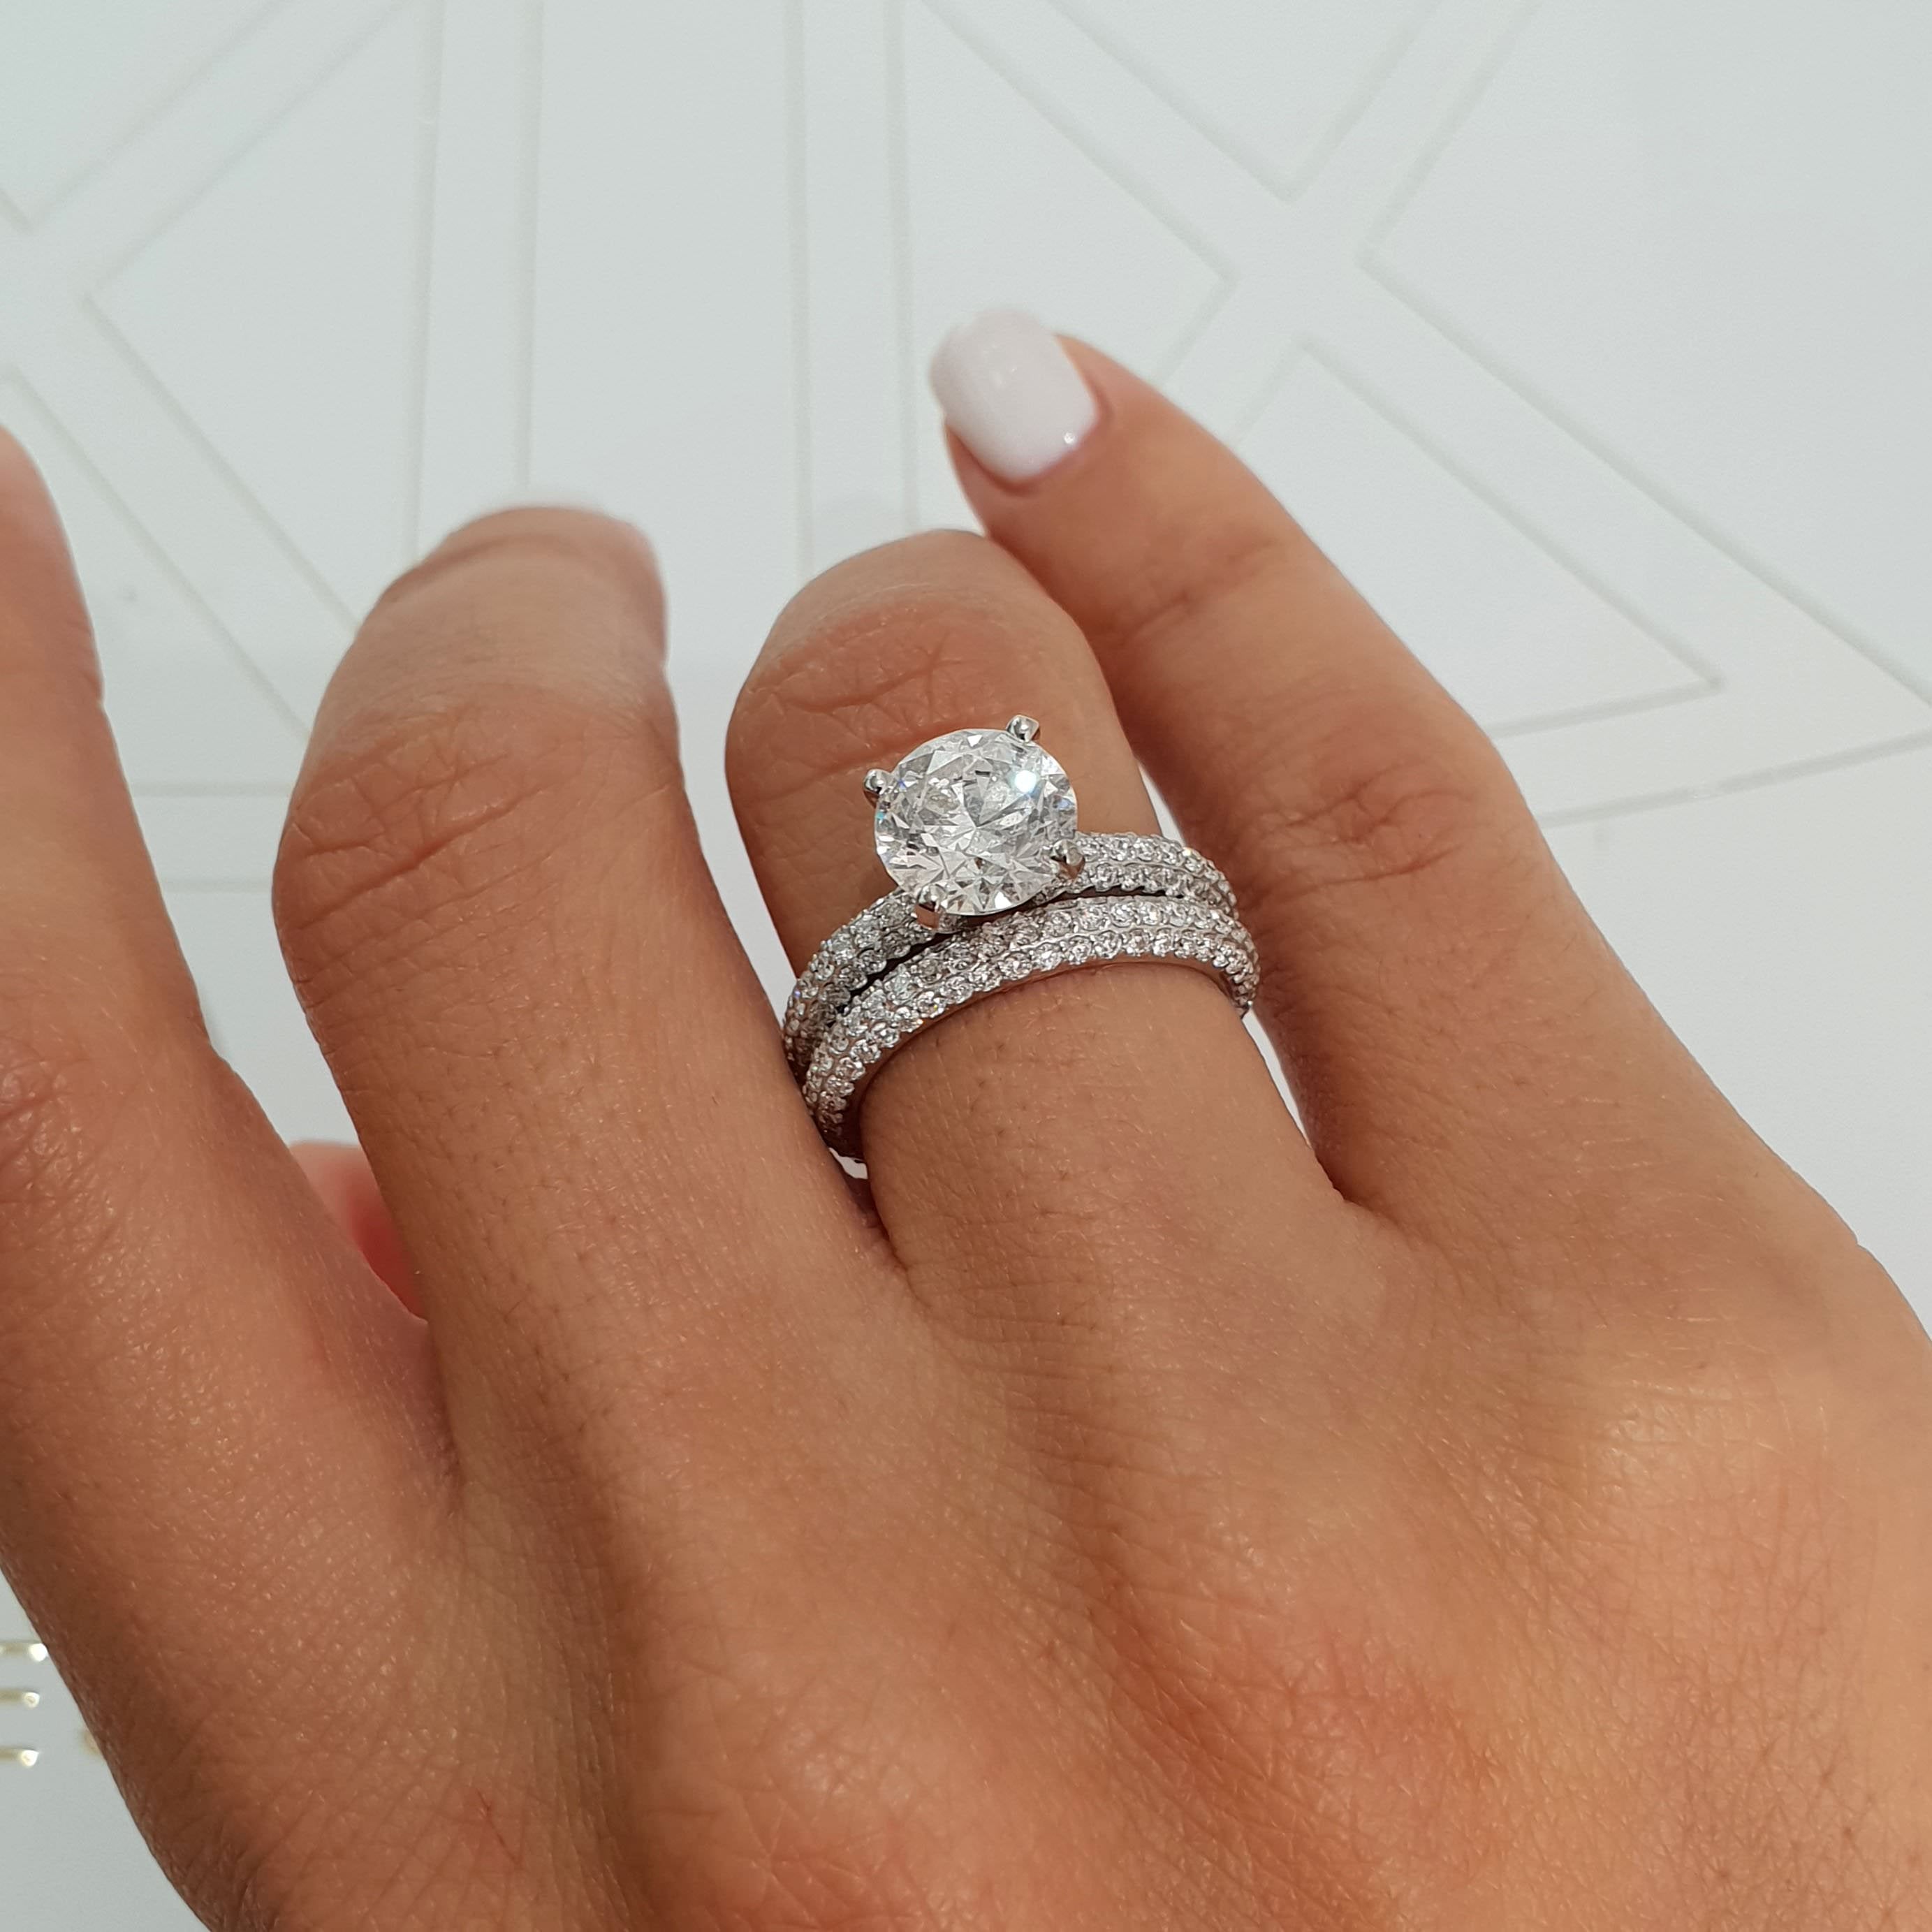 The 4 Carat Diamond Ring Guide– How to Take Advantage of that Size